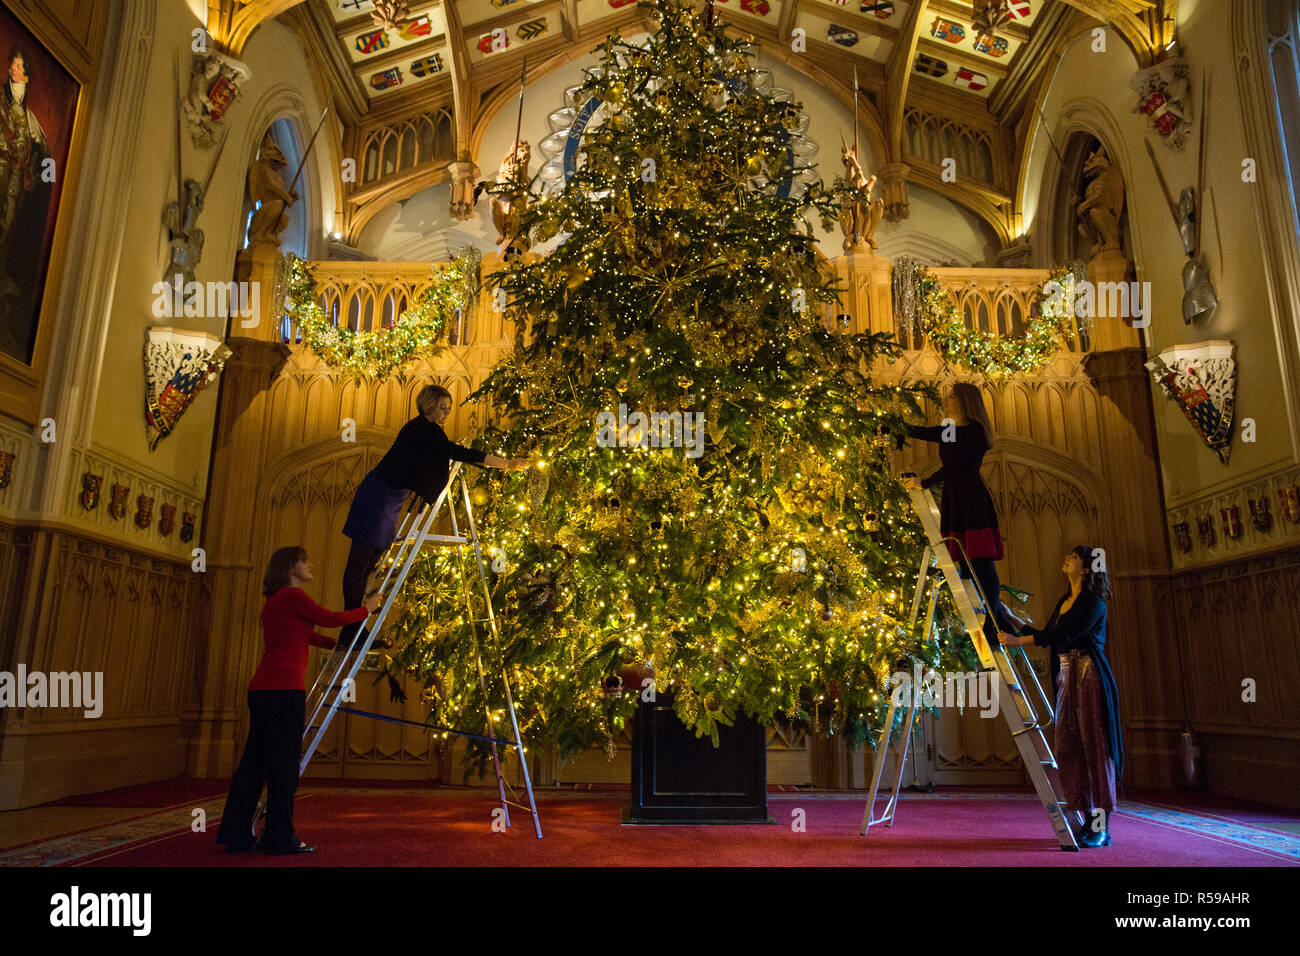 Windsor, UK. 30th Nov, 2018. The State Apartments at Windsor Castle have been decorated with glittering Christmas trees and twinkling lights for Christmas. Seen here in St George's Hall a striking 20ft Nordmann Fir tree from Windsor Great Park dressed in gold. A 15ft Christmas tree also appears in the Crimson Drawing Room. Credit: Mark Kerrison/Alamy Live News Stock Photo